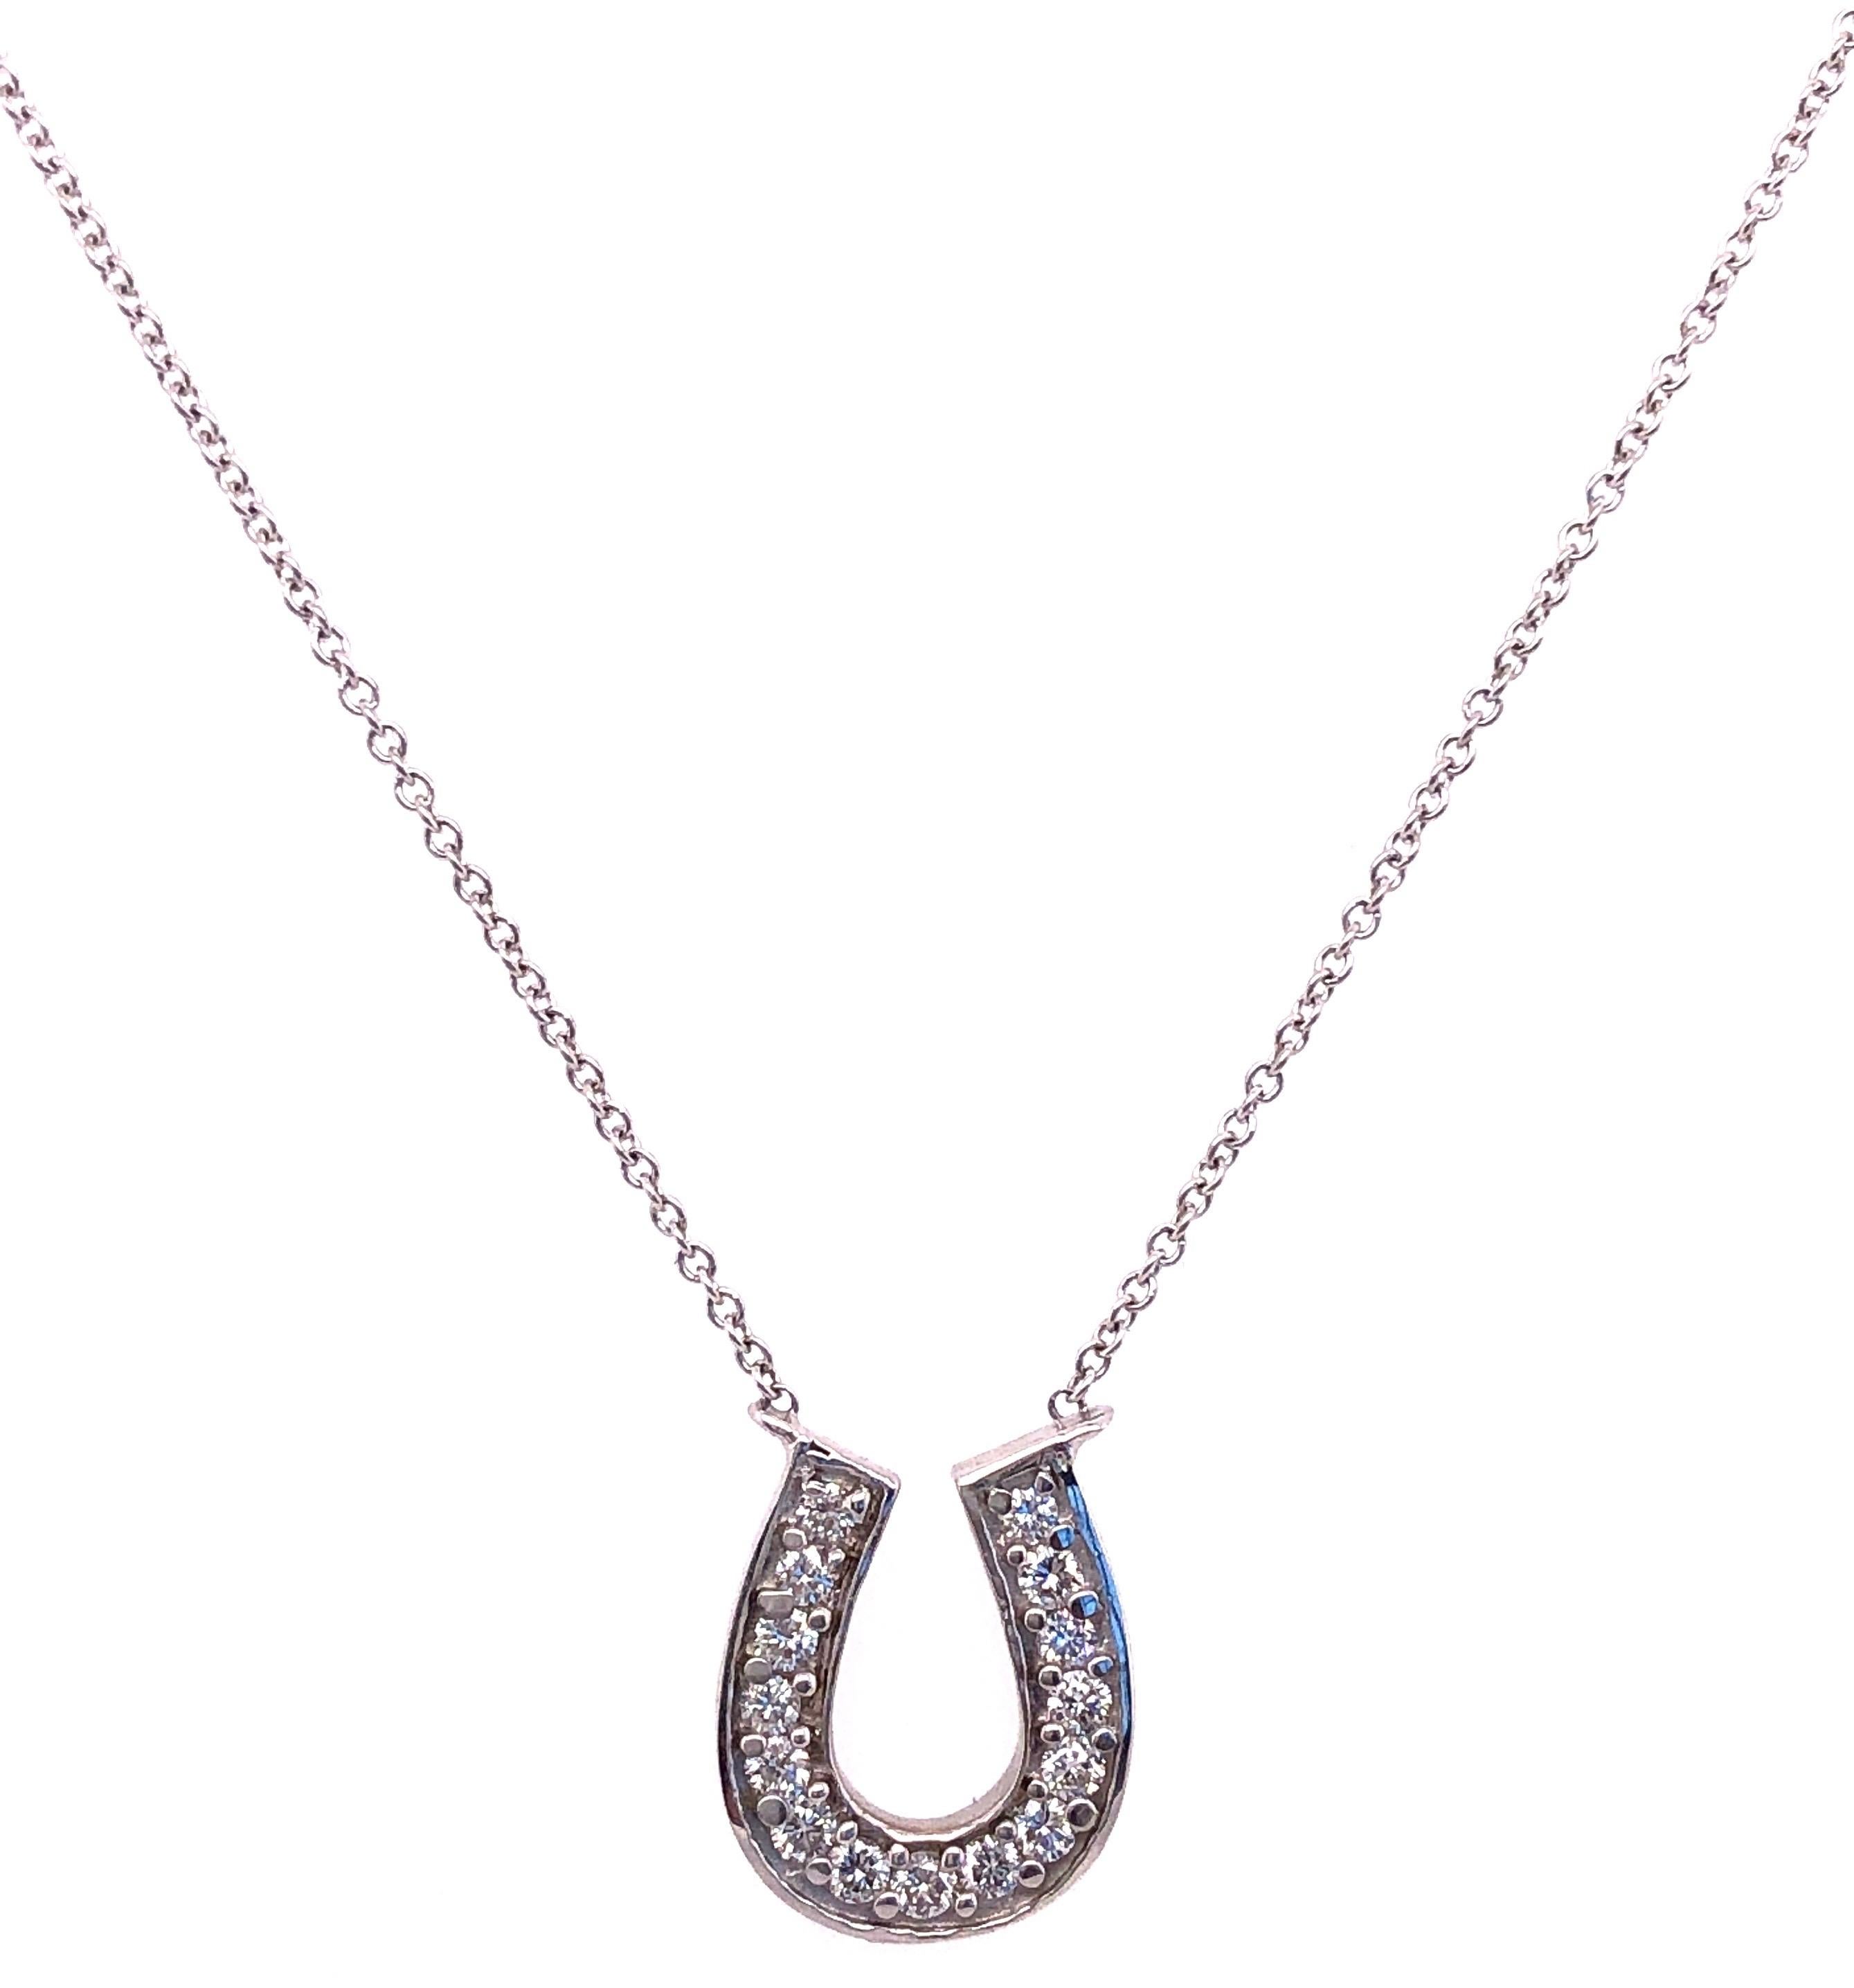 Modern 18 Karat White Gold Cable Link Necklace with Horse Shoe Pendant 0.50 TDW